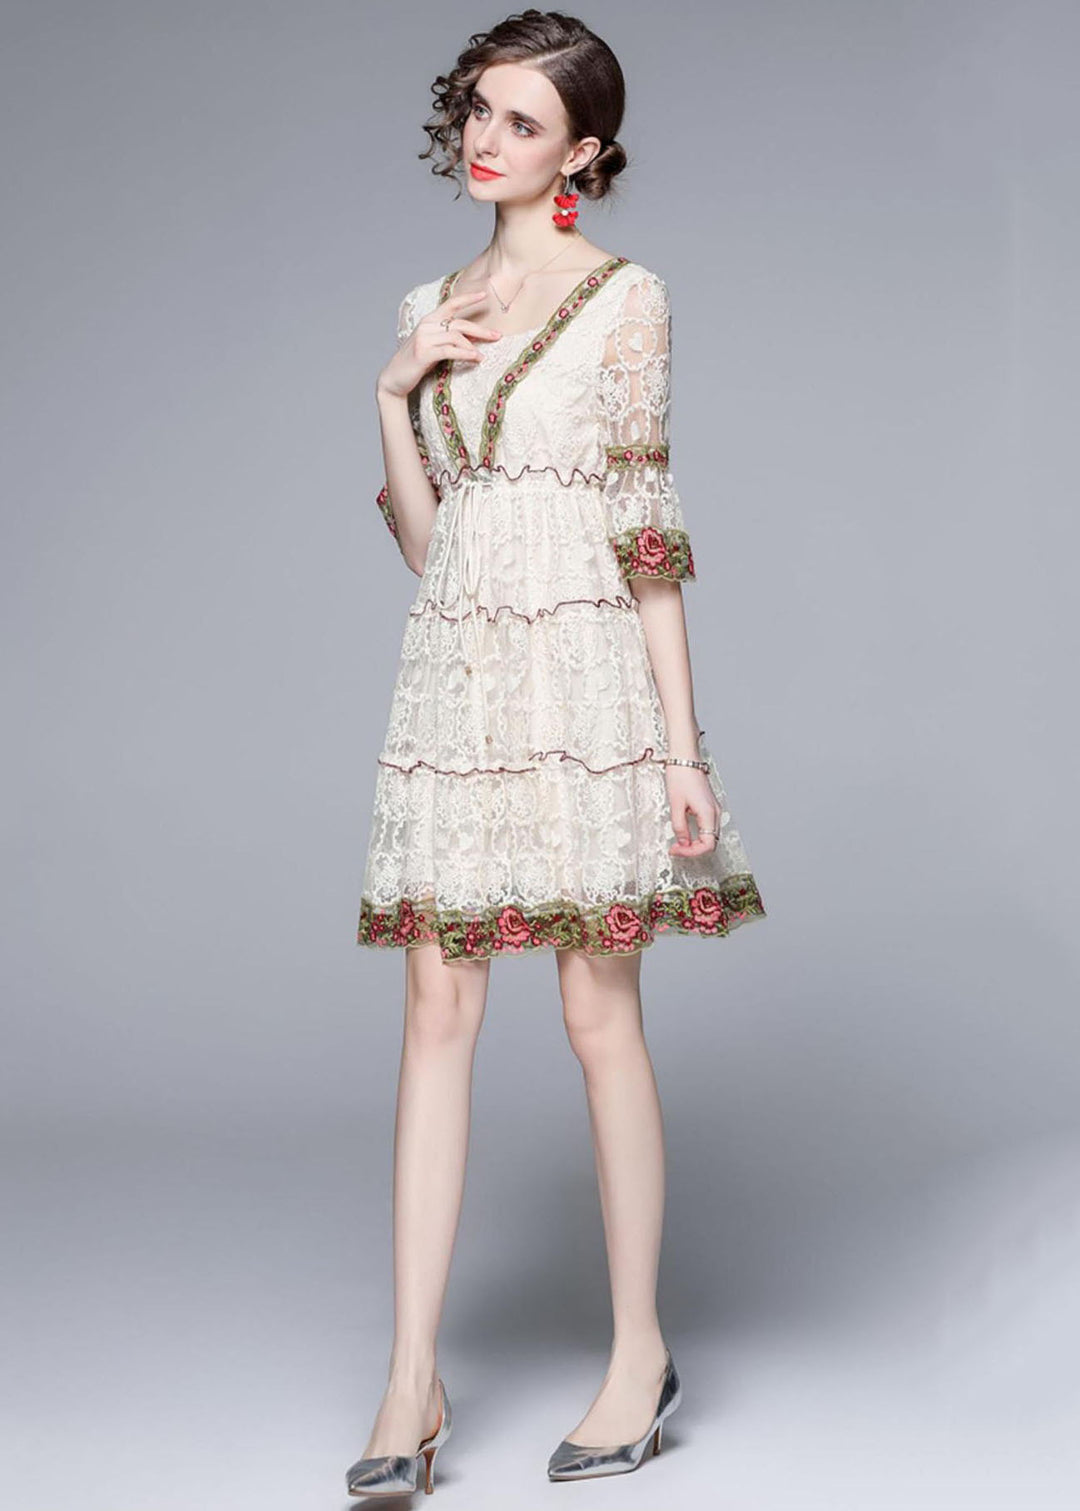 Style White Ruffled Embroideried Patchwork Lace Mid Dress Summer